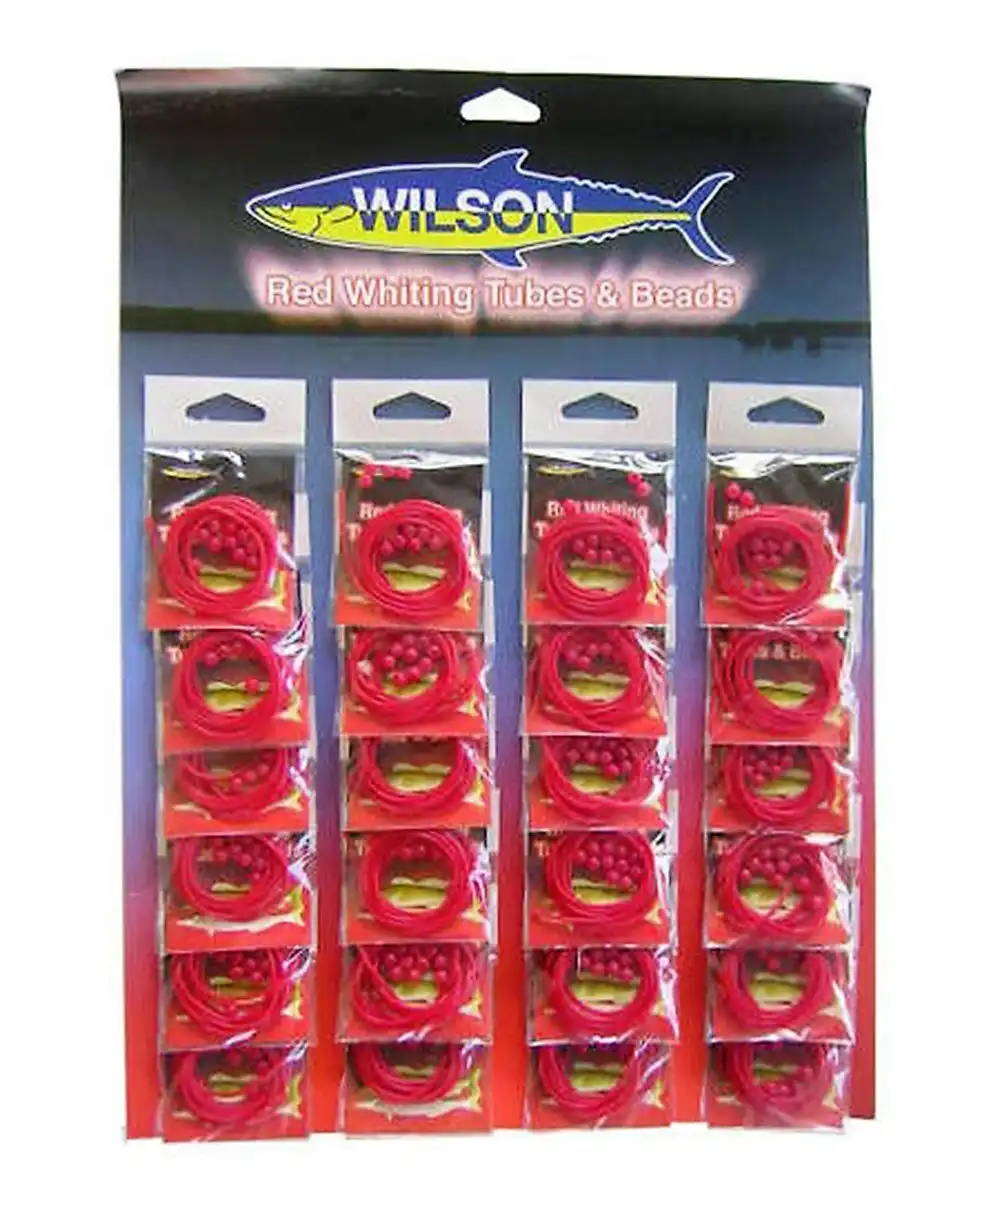 24 x Packets of Wilson Red Whiting Tube and Beads